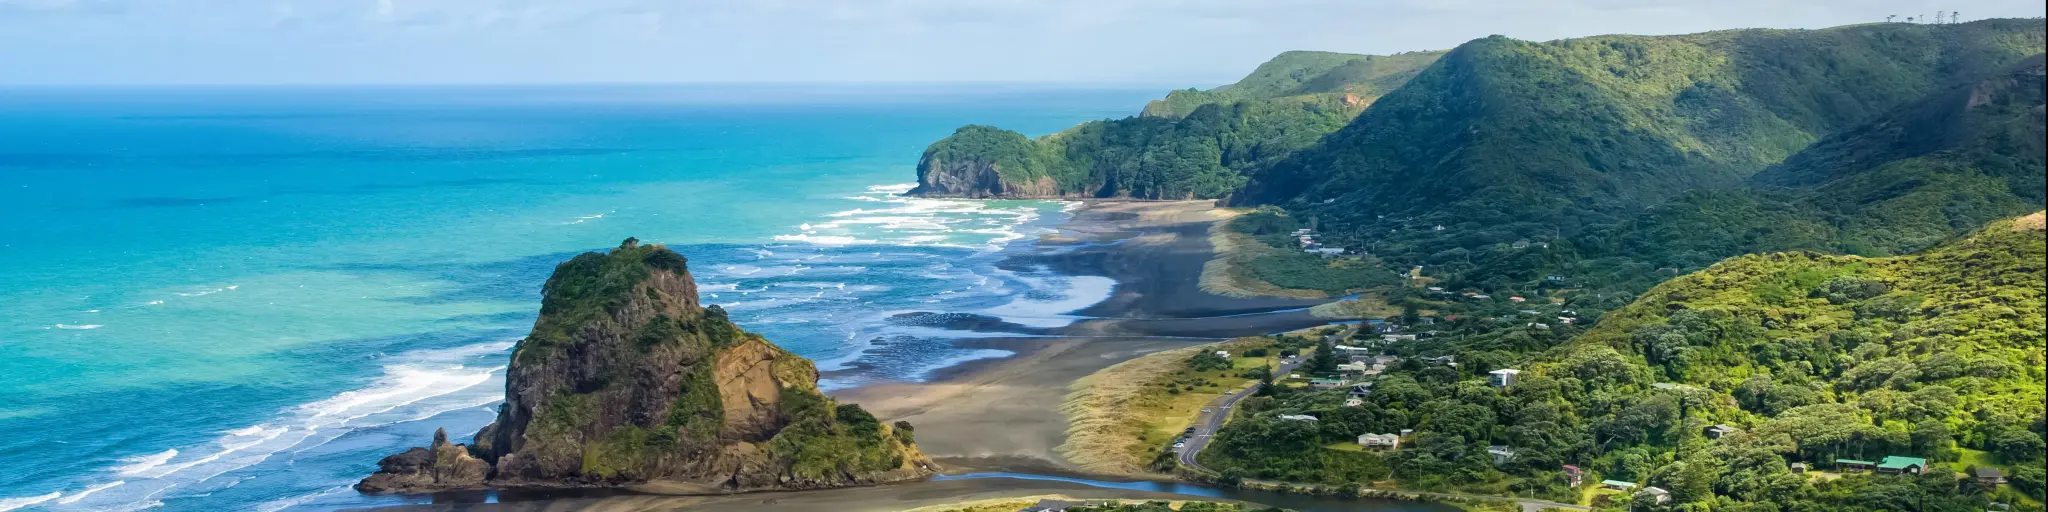 Piha beach which is located at the West Coast in Auckland,New Zealand.